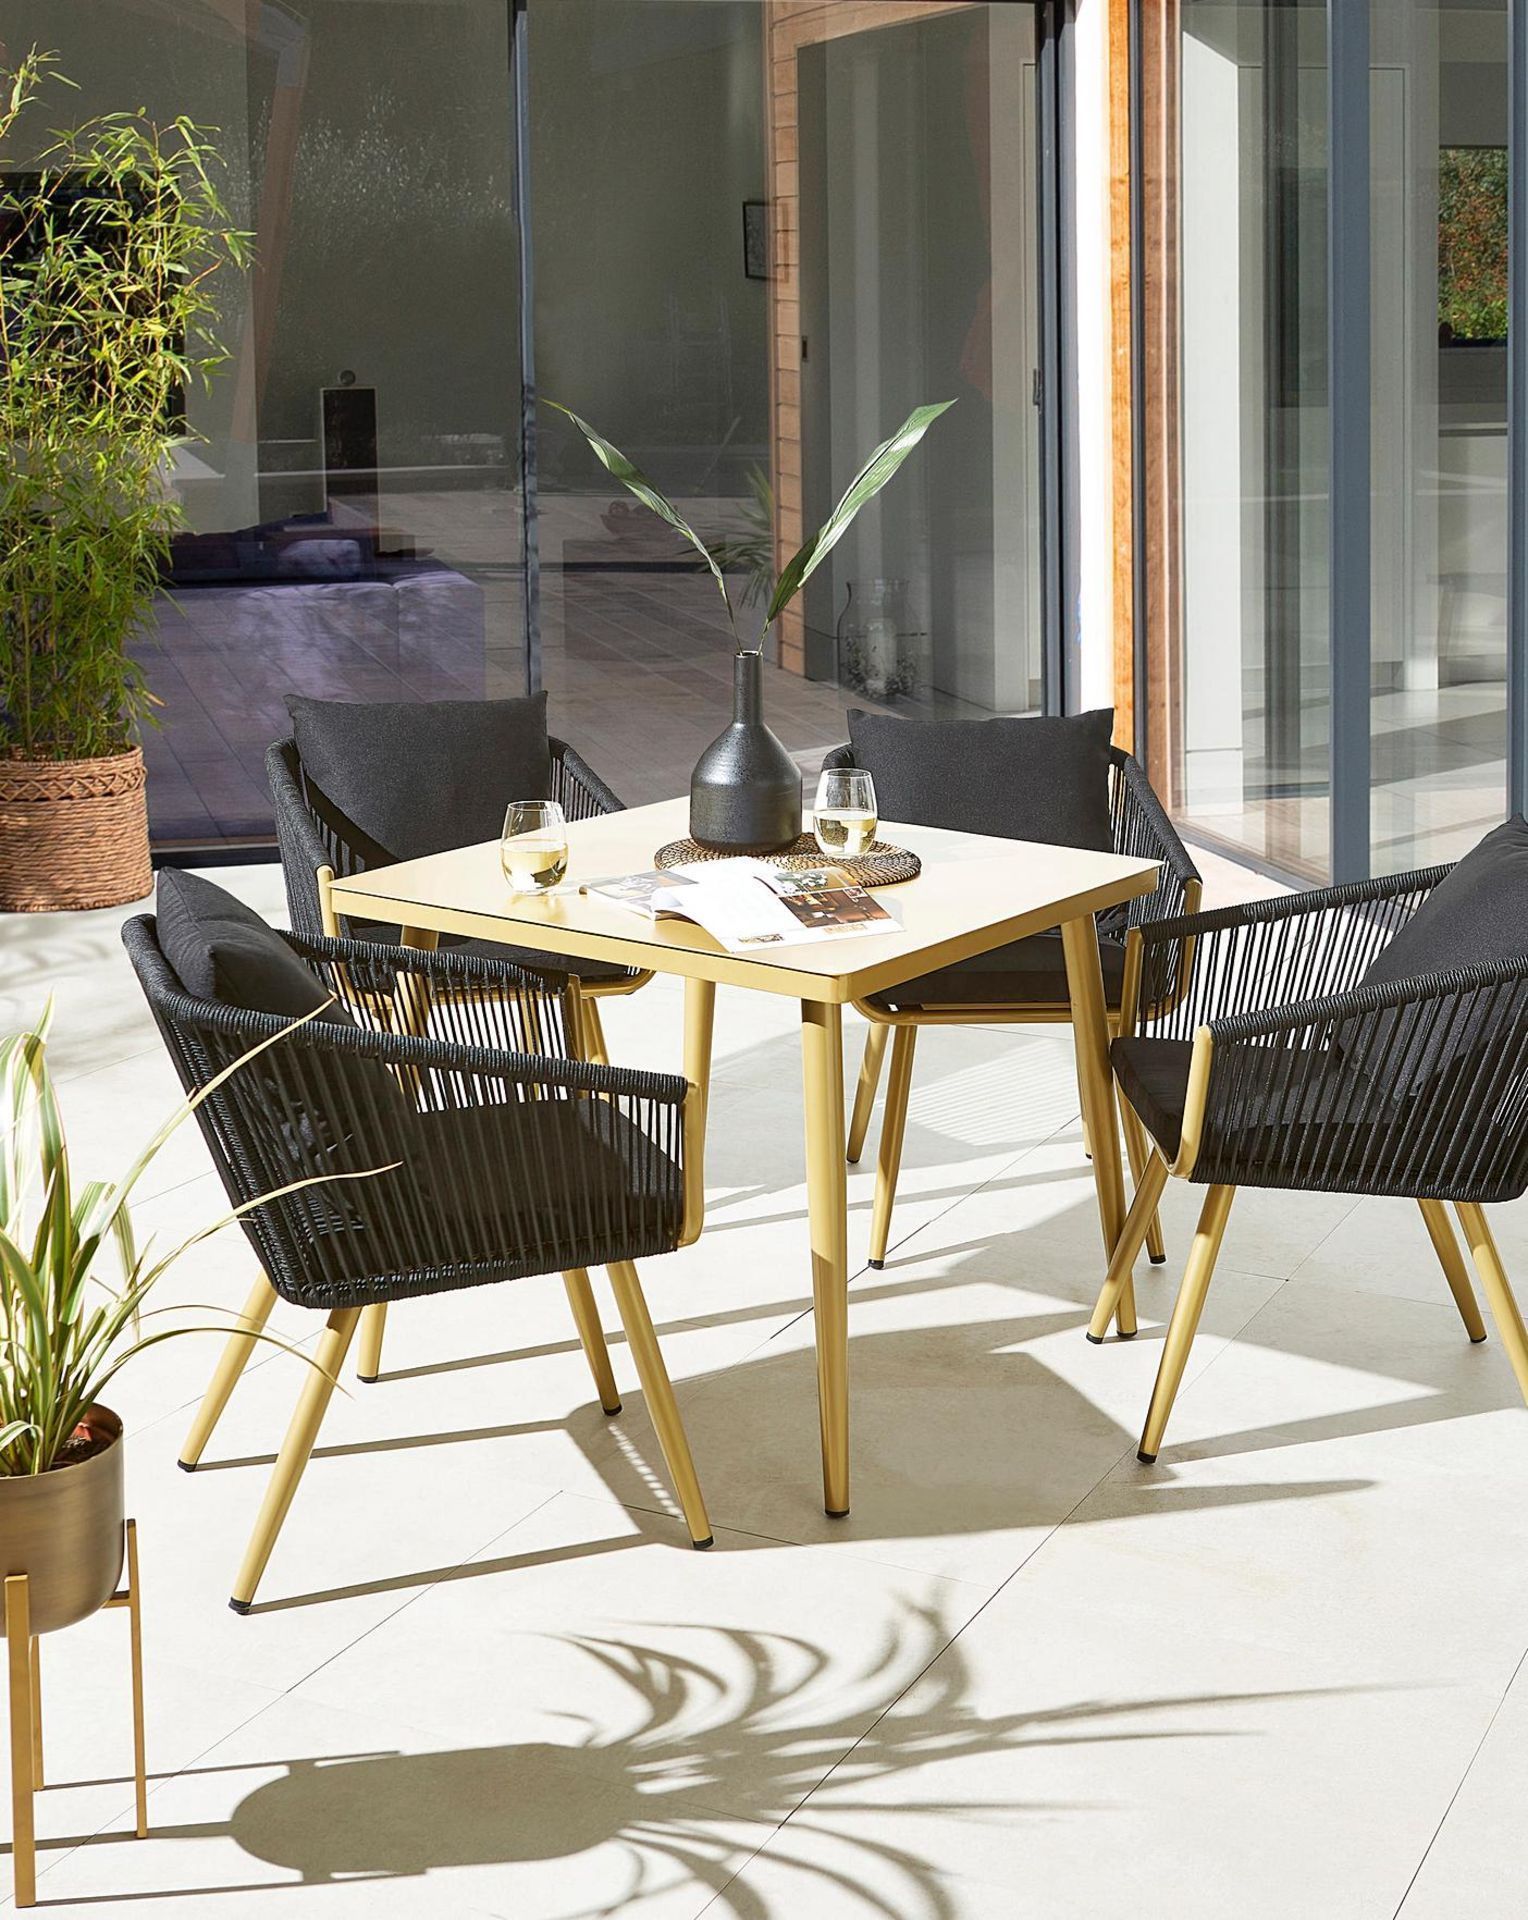 Trade Lot 4 x New & Packaged Joanna Hope Naya 4 Seater Dining Sets. RRP £719 each. This Exclusive - Image 2 of 11